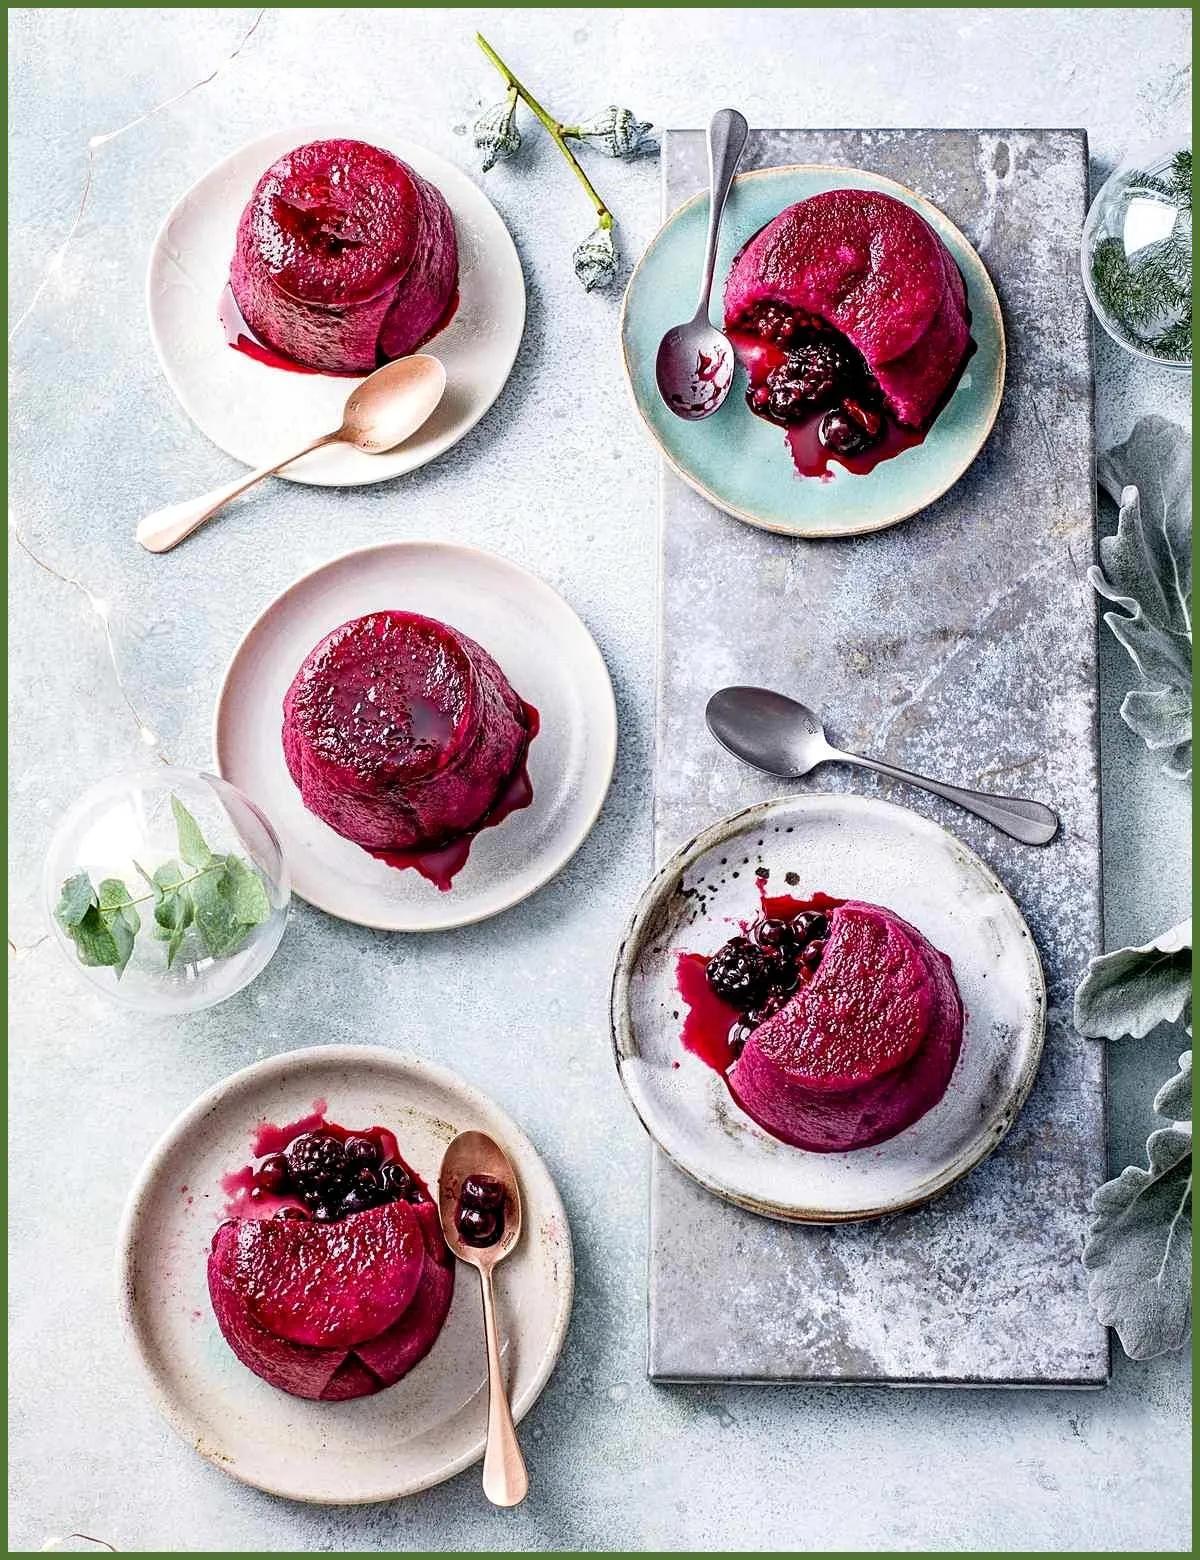 Mulled wine winter puddings Easy Warm Winter Puddings with Mulled Wine ...